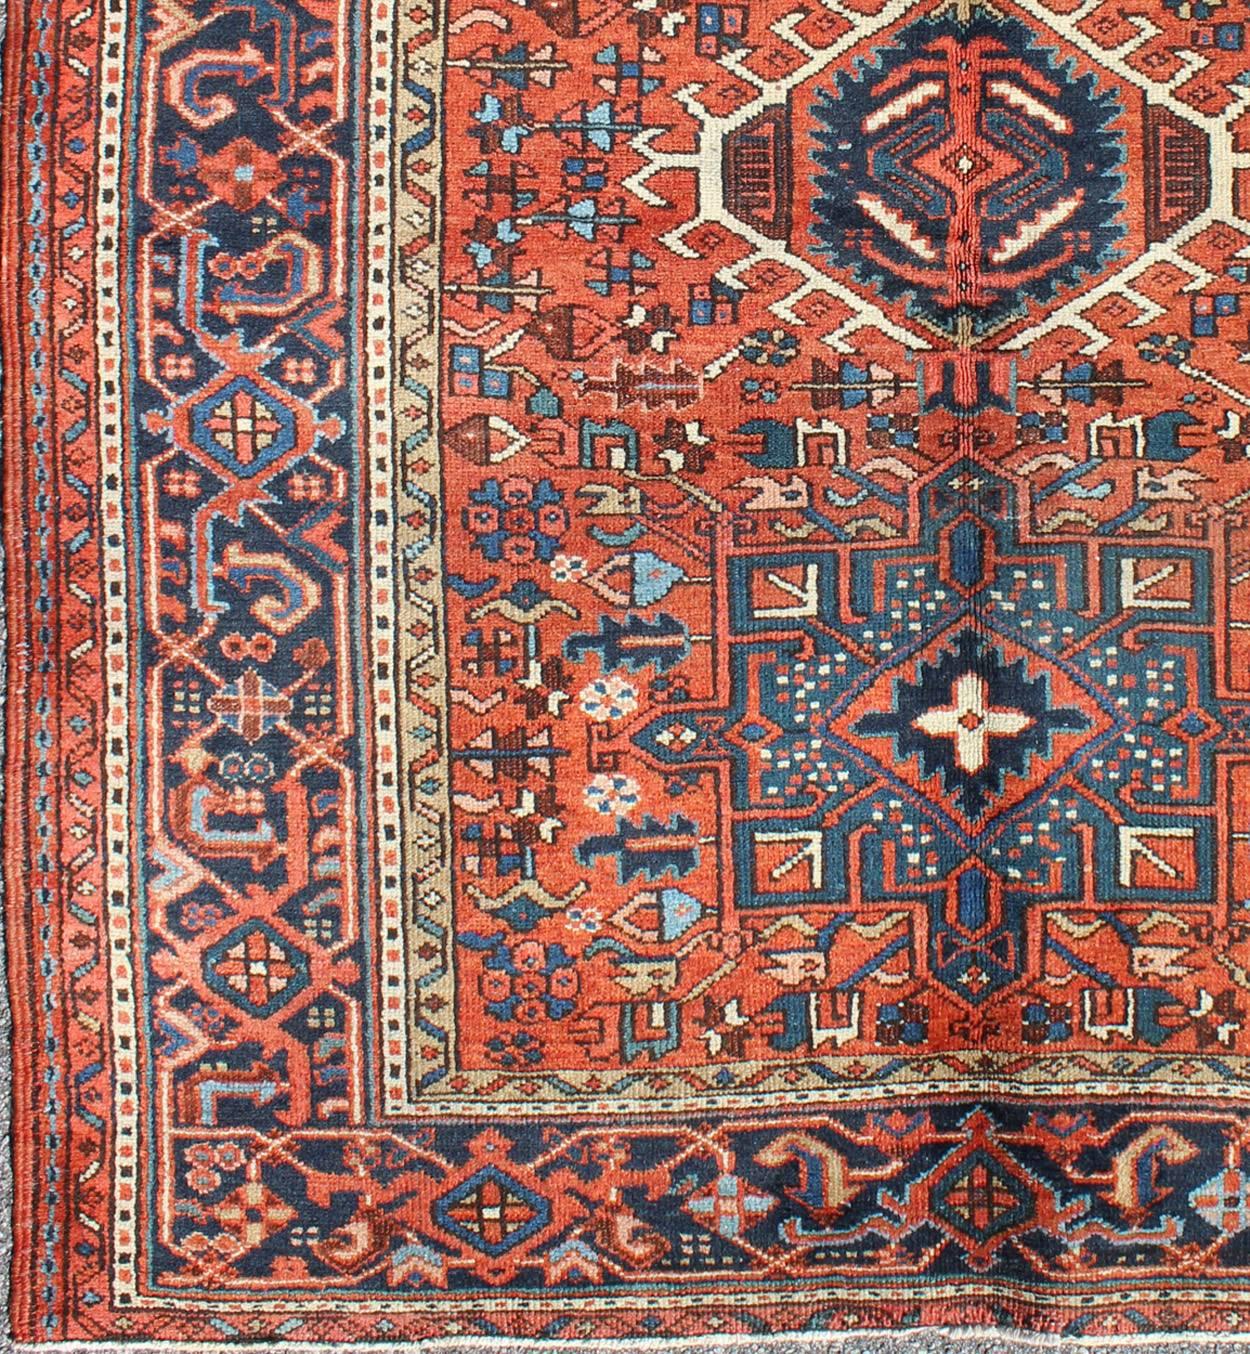 Exquisite antique Persian Serapi-Karajeh, rug H8-0302, country of origin / type: Persian / Serapi-Karajeh, circa early-20th century.

Traditionally inspired by the Caucasian designs found in carpets from Russia and northern Persia, this antique